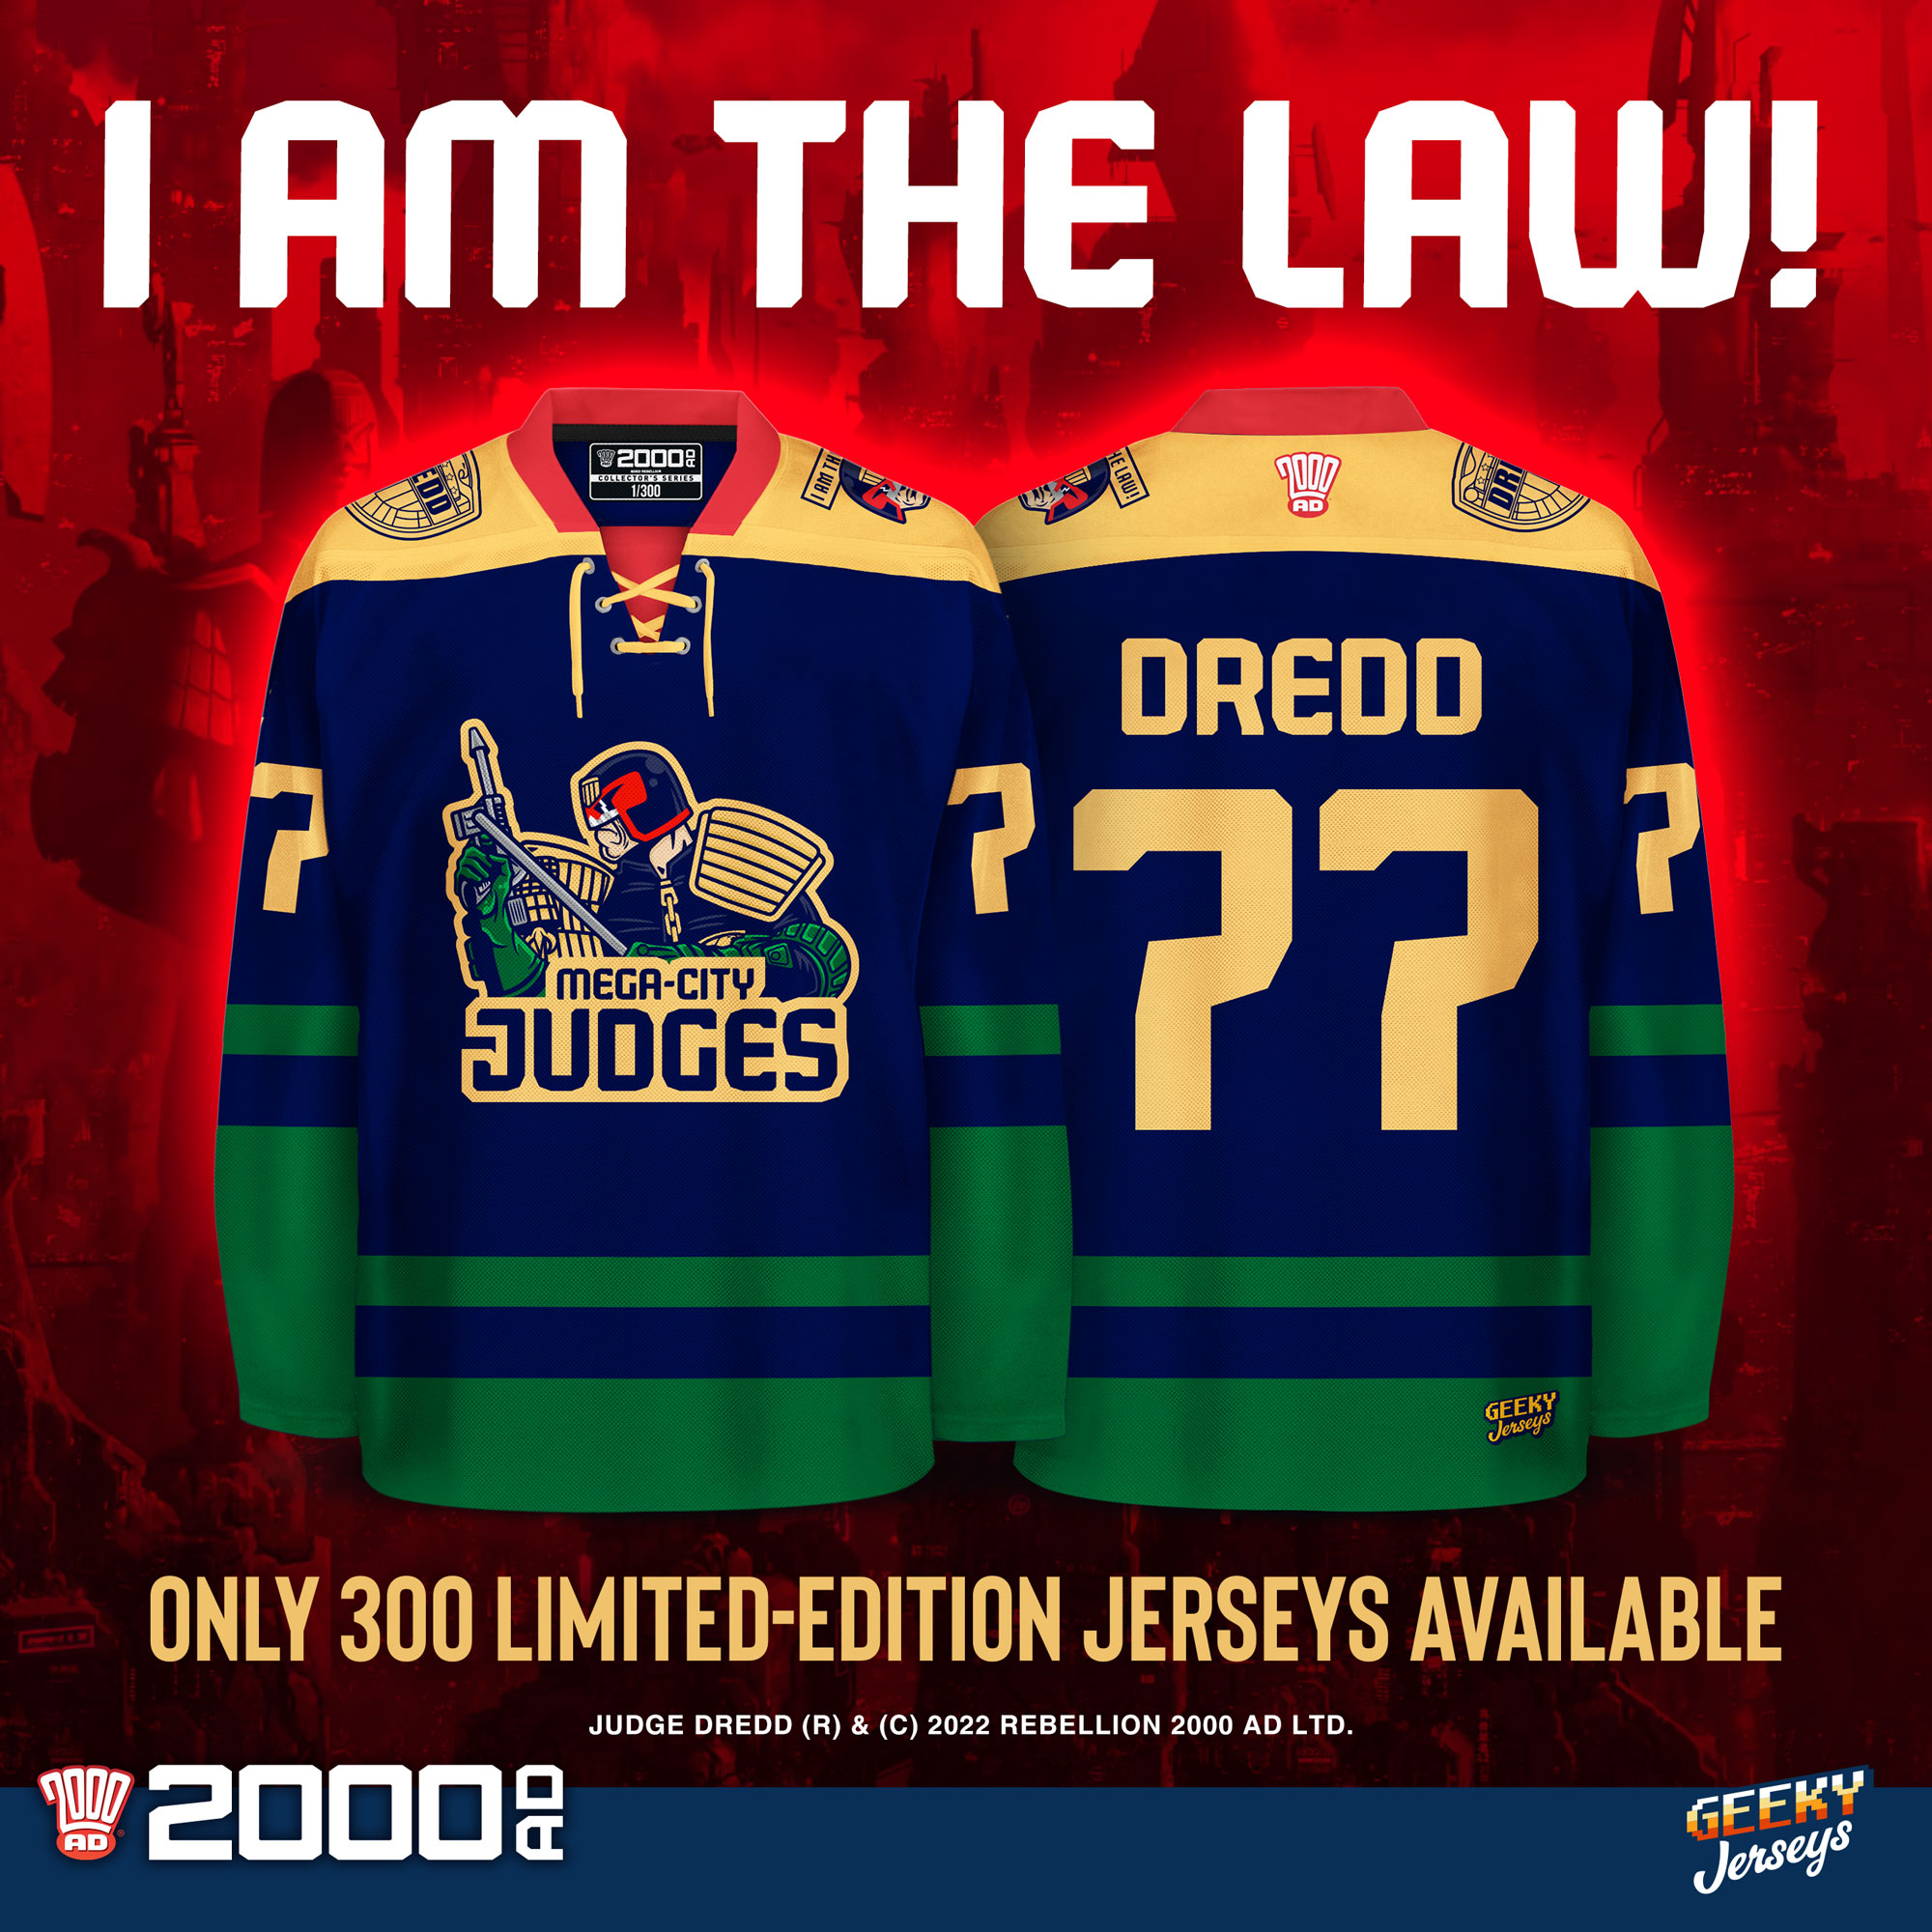 Go, Dredd! The ultimate lawman comes to Geeky Jerseys